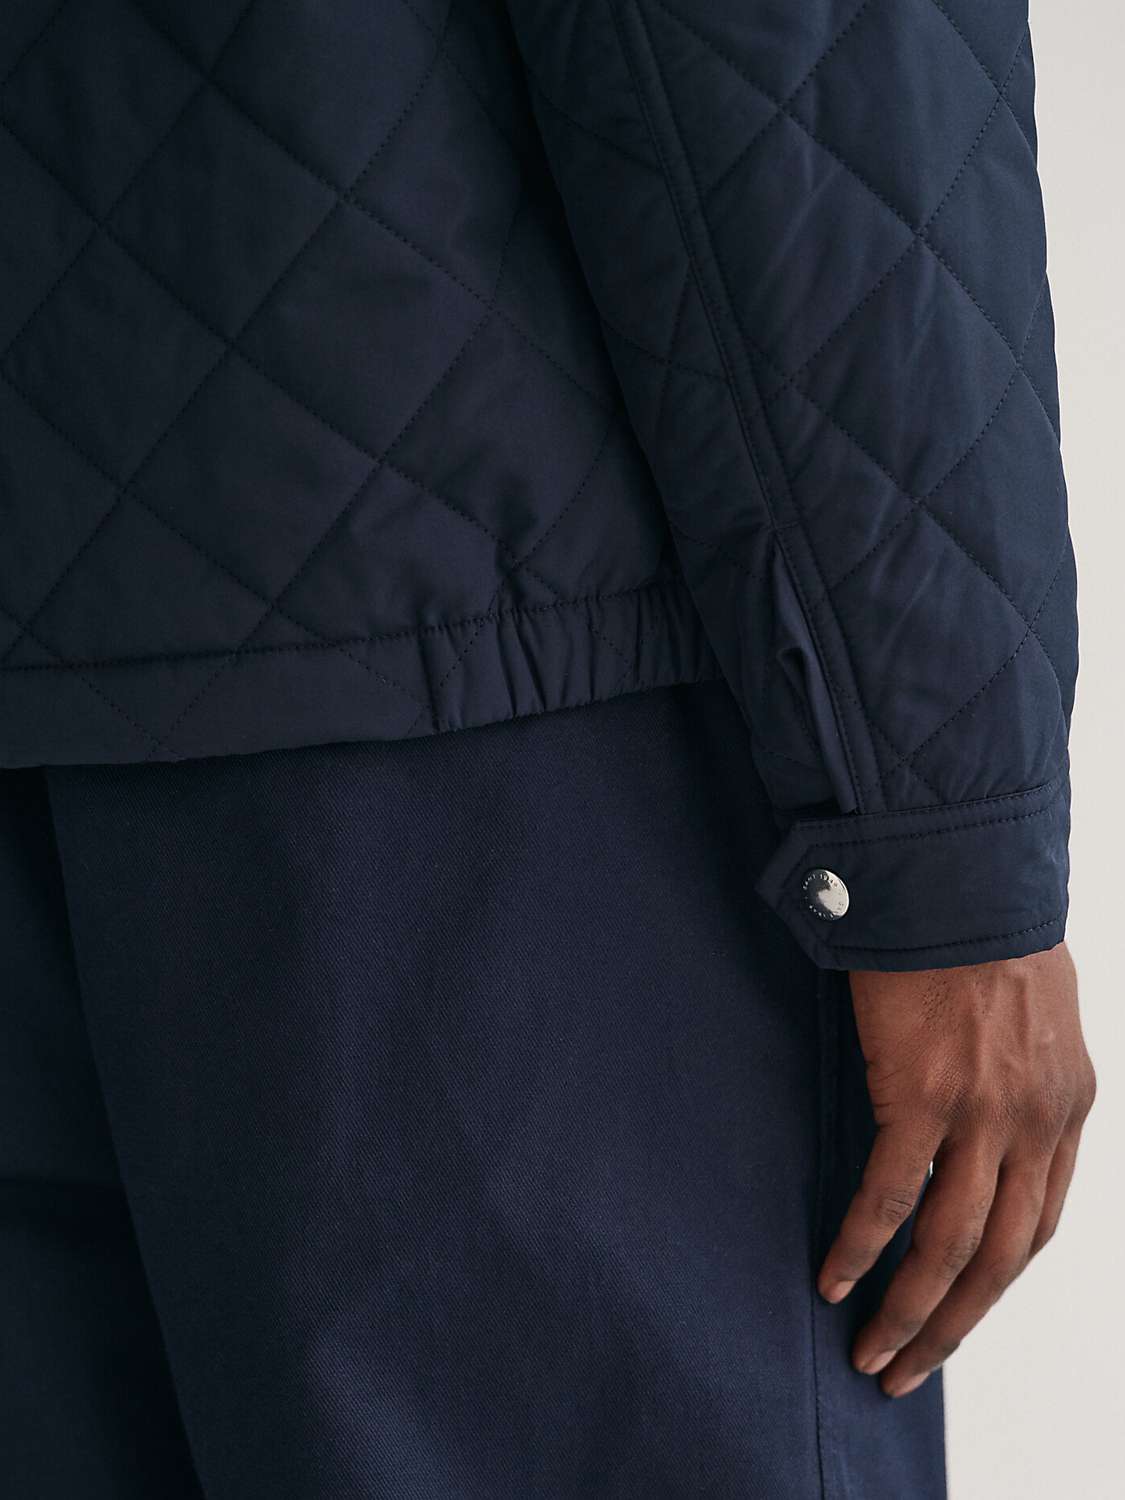 GANT Quilted Windcheater Jacket, Evening Blue at John Lewis & Partners